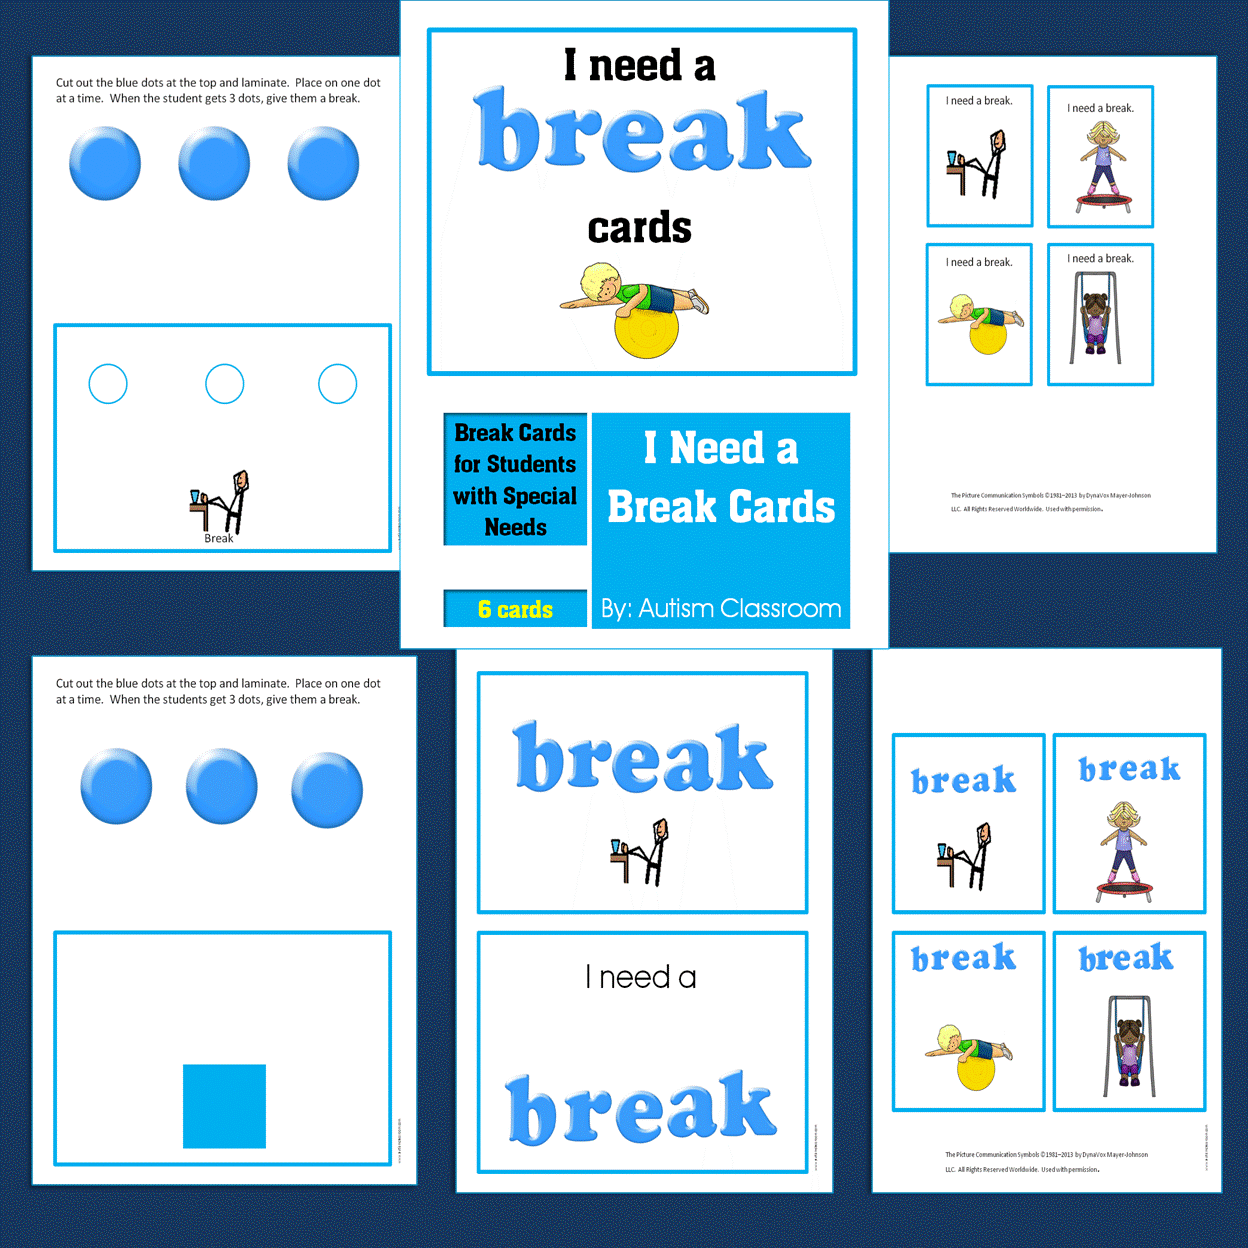 autism-classroom-i-need-a-break-break-cards-for-students-with-limited